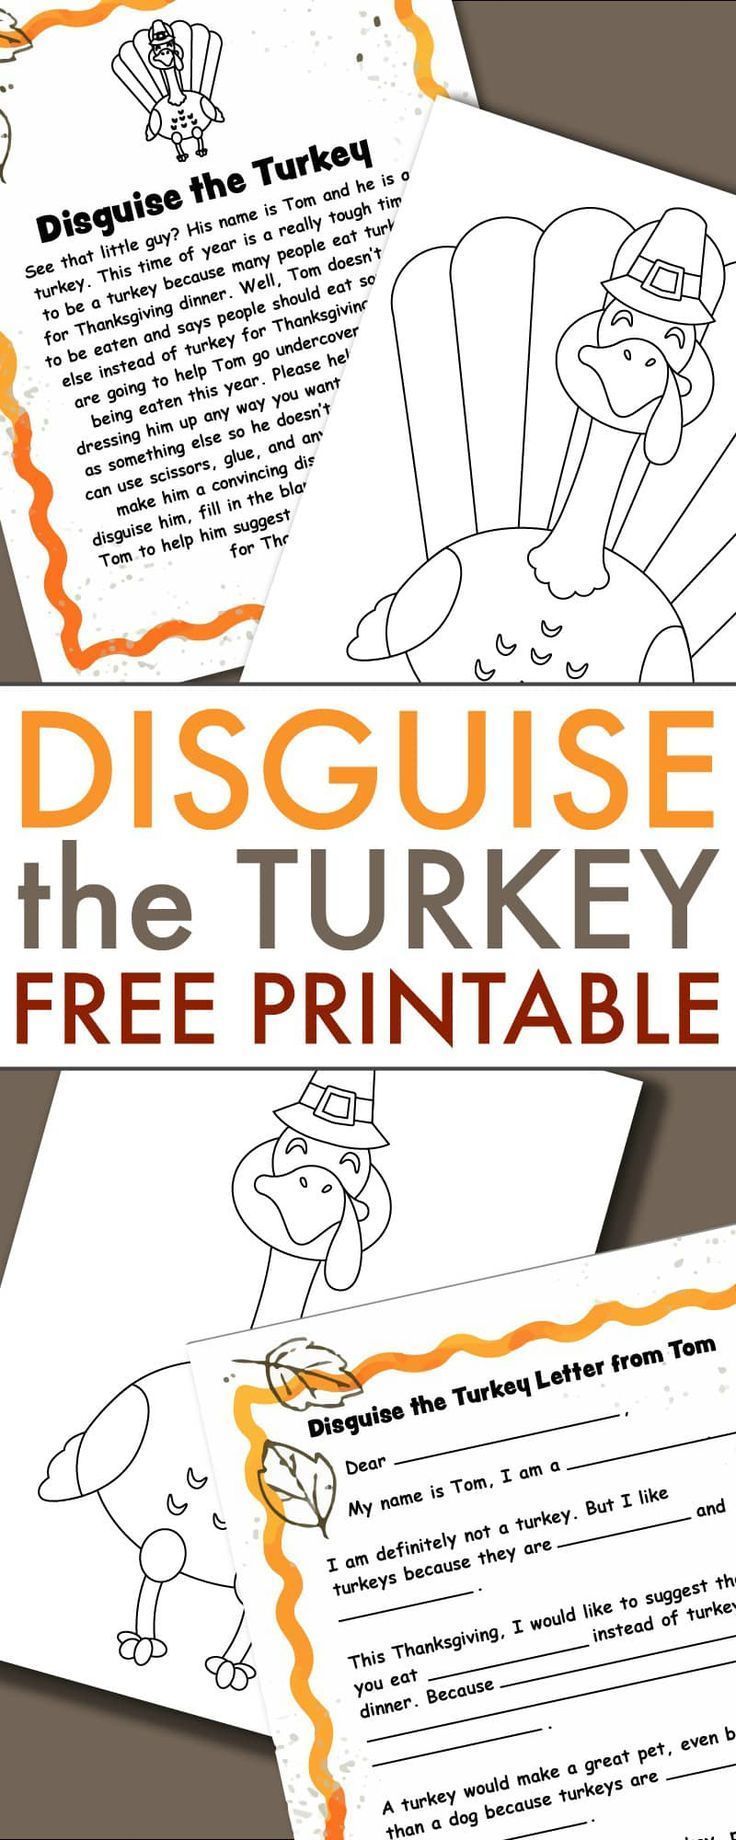 A Turkey in Disguise Project Free Printable Template -   18 disguise a turkey project printable template ideas